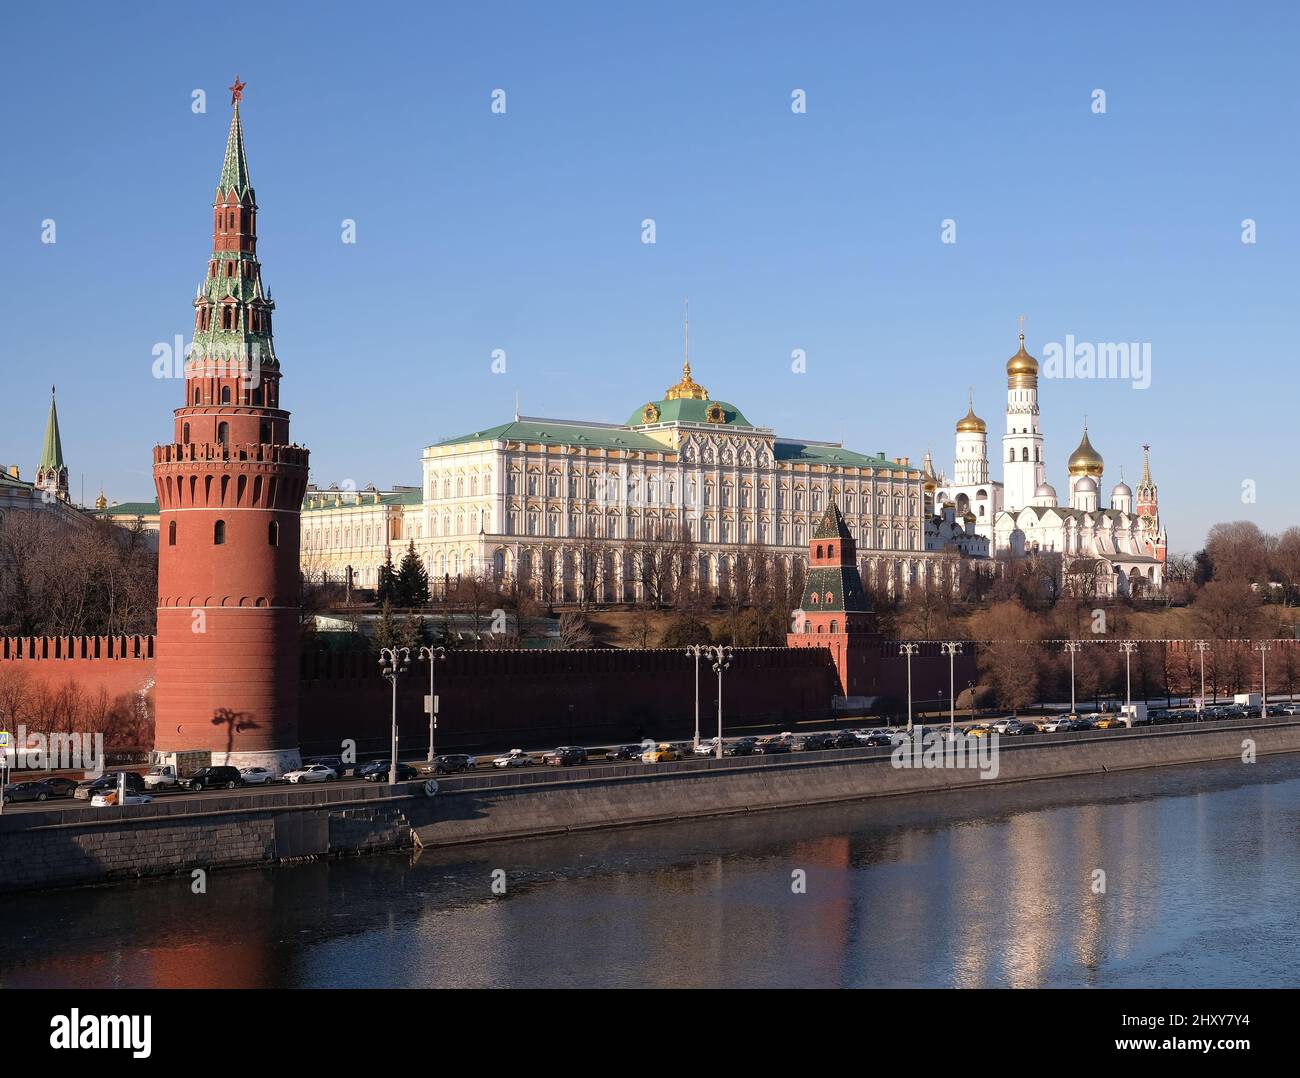 Vodovzvodnaya tower and Grand Kremlin Palace of Moscow Kremlin behind the wall on embankment ot the riverin in bright spring sunny day Stock Photo